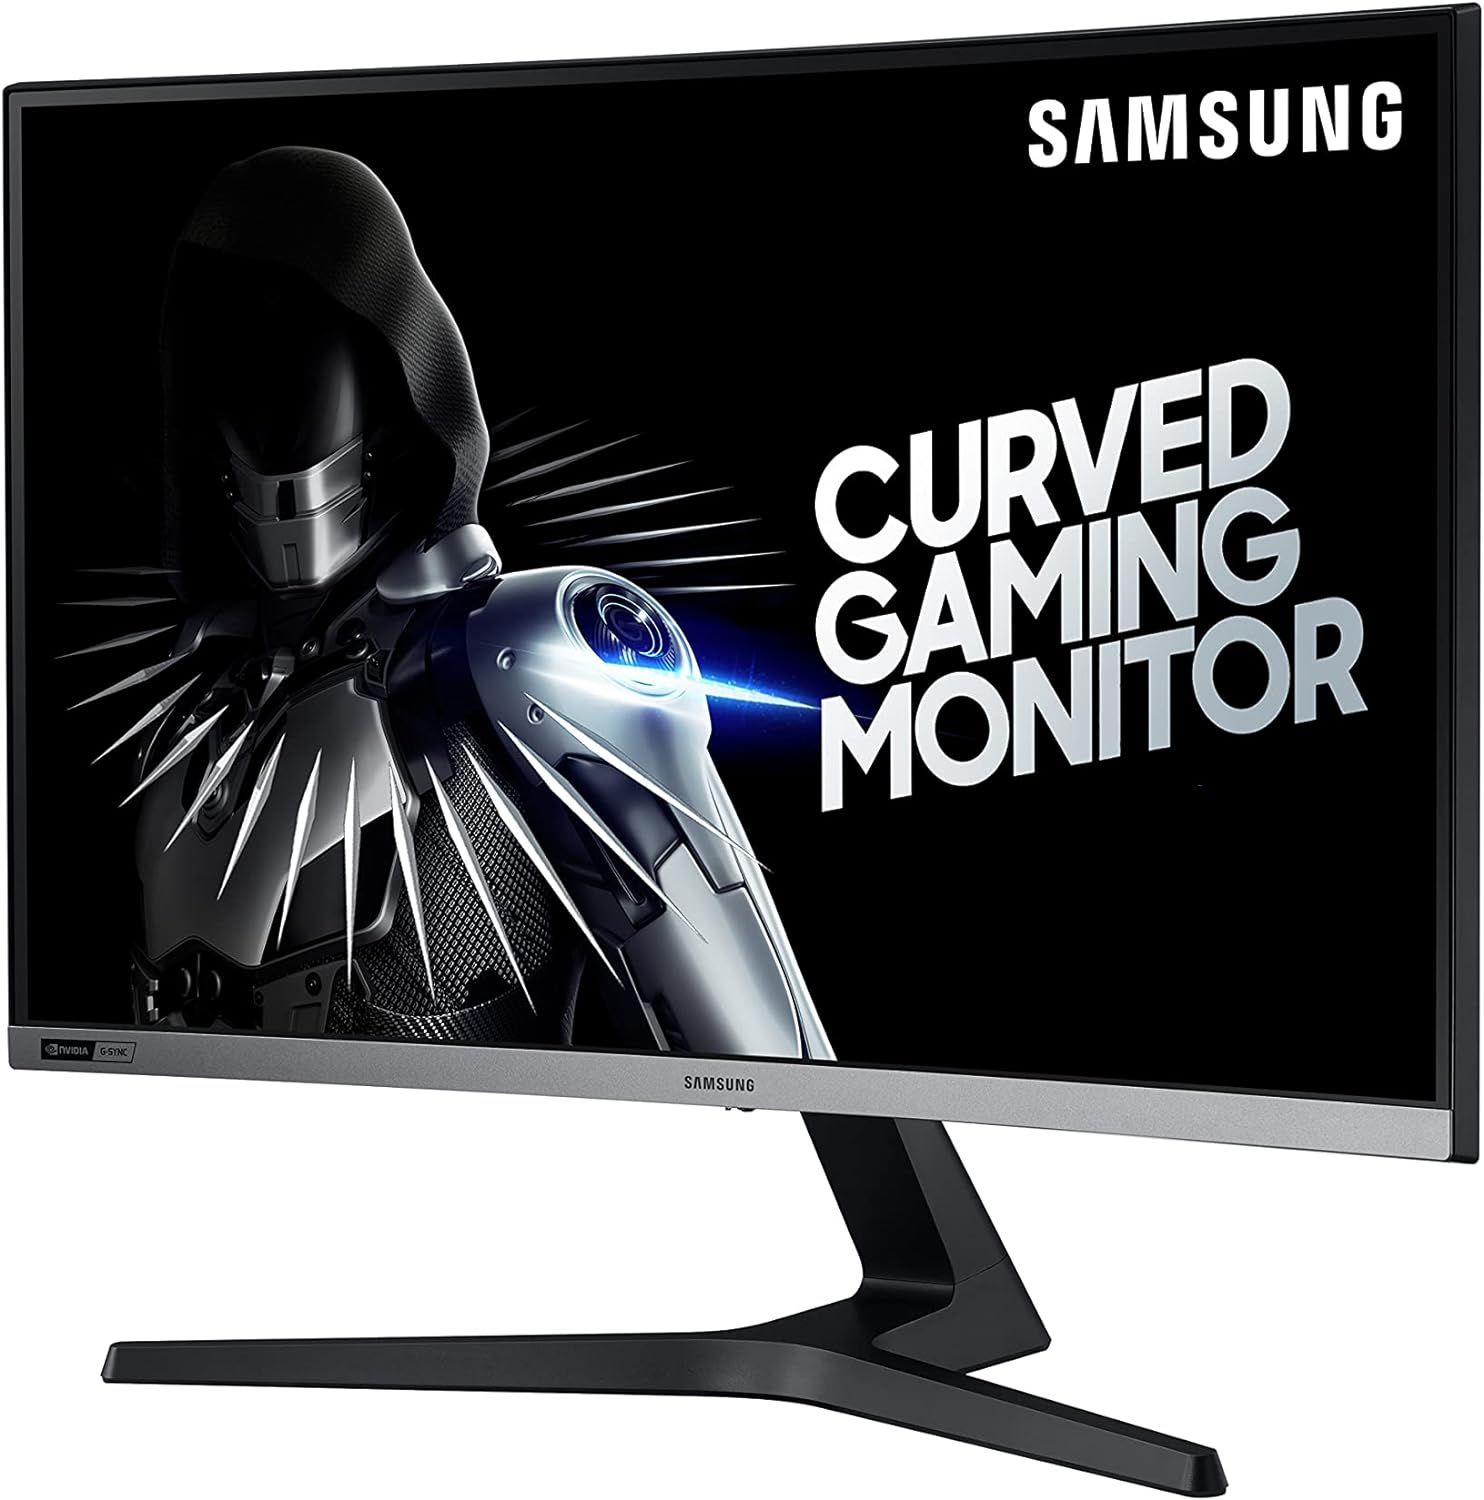 Samsung LC27RG50FQUXEN product image of a black, curved monitor with Samsung and "Curved Gaming Monitor" branding in white on the display.